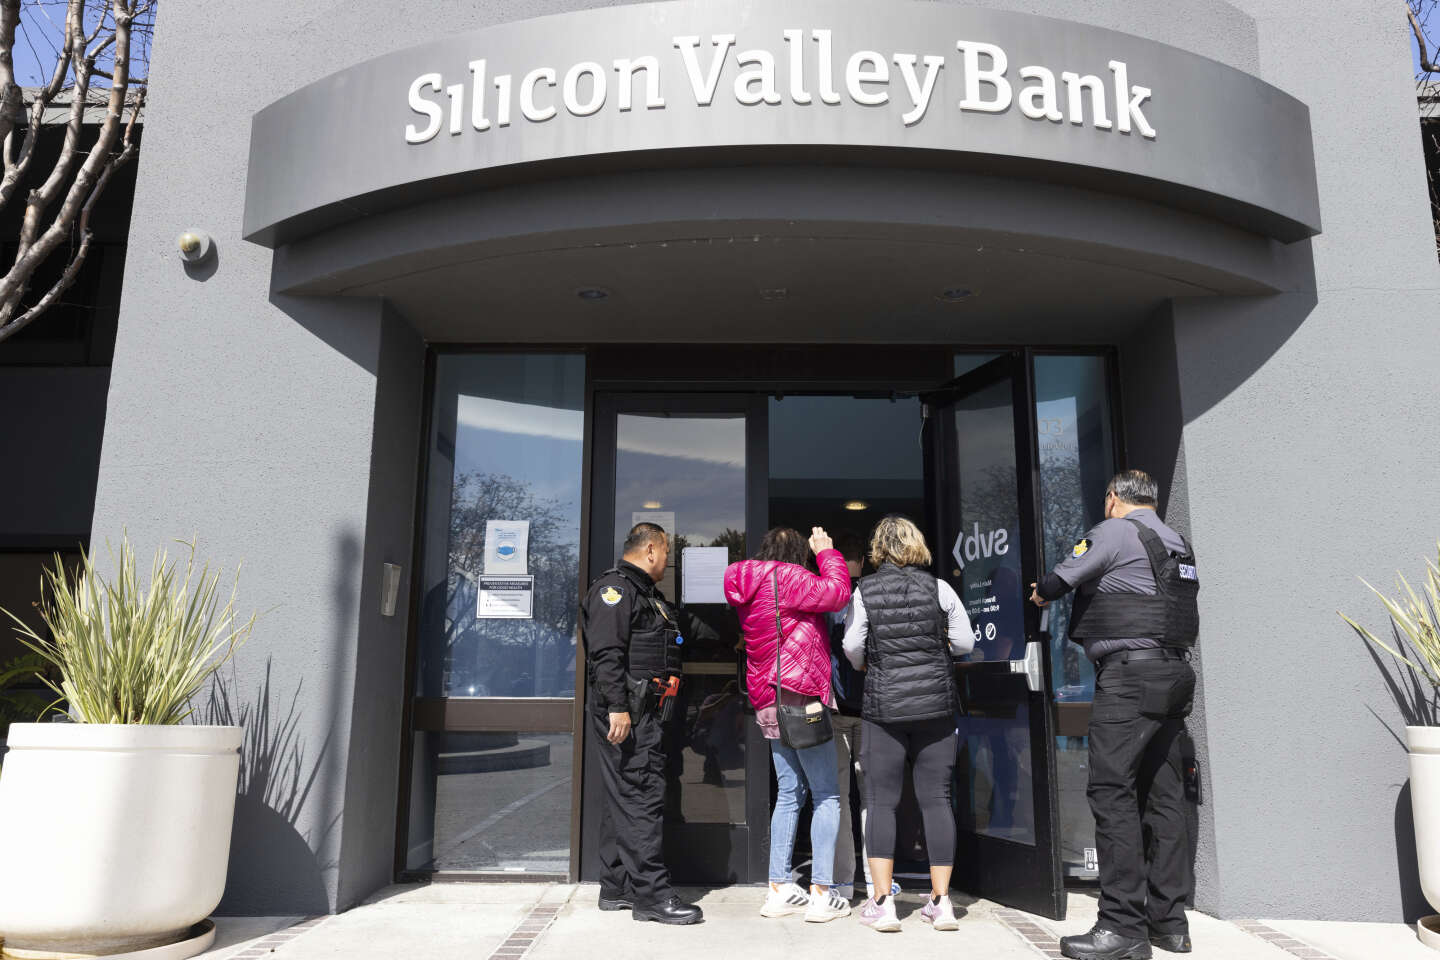 “Silicon Valley Bank’s balance sheet was not so bad, but invested in bonds”